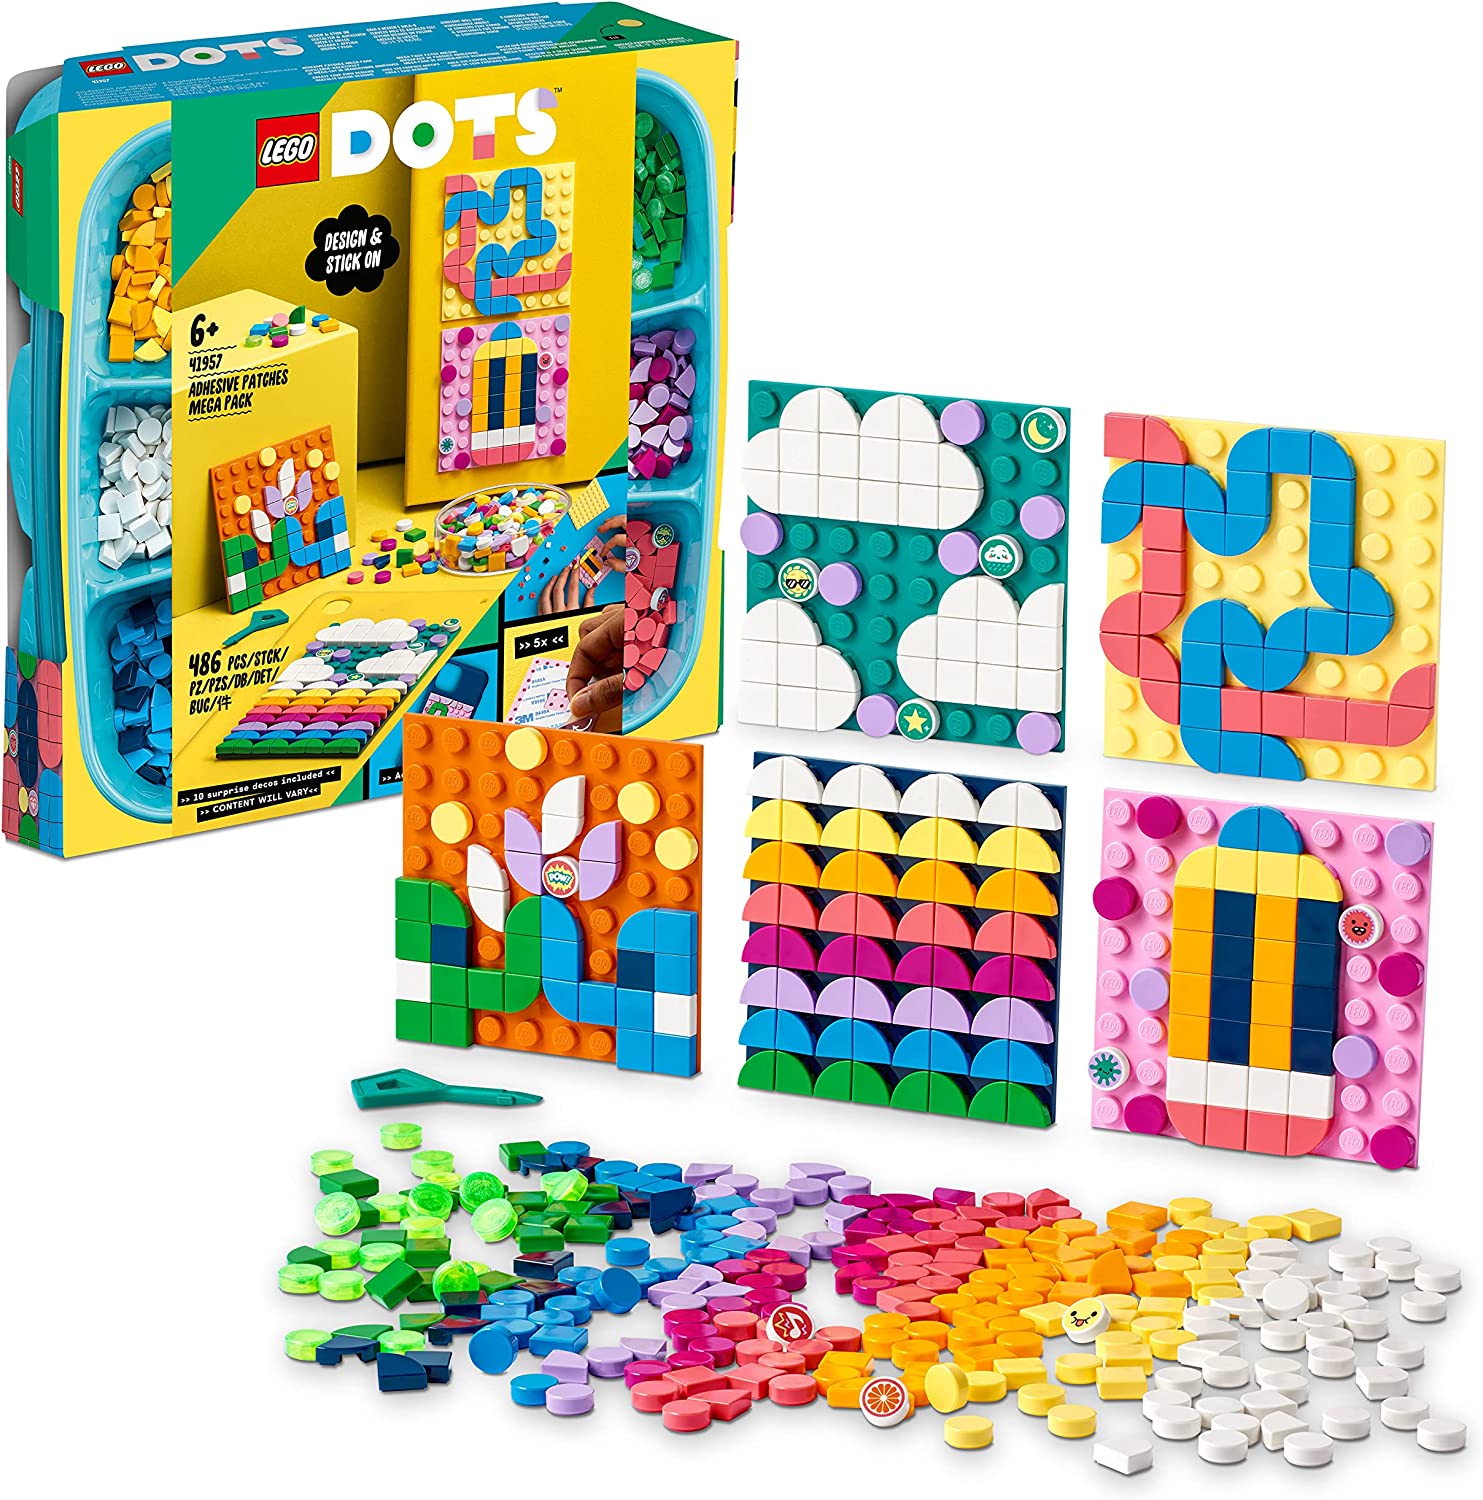 LEGO 41957 DOTS Creative Sticker Set, 5-in-1 DIY Craft Set for Children from 6 Years, for Crafting Personalised Mosaic Stickers